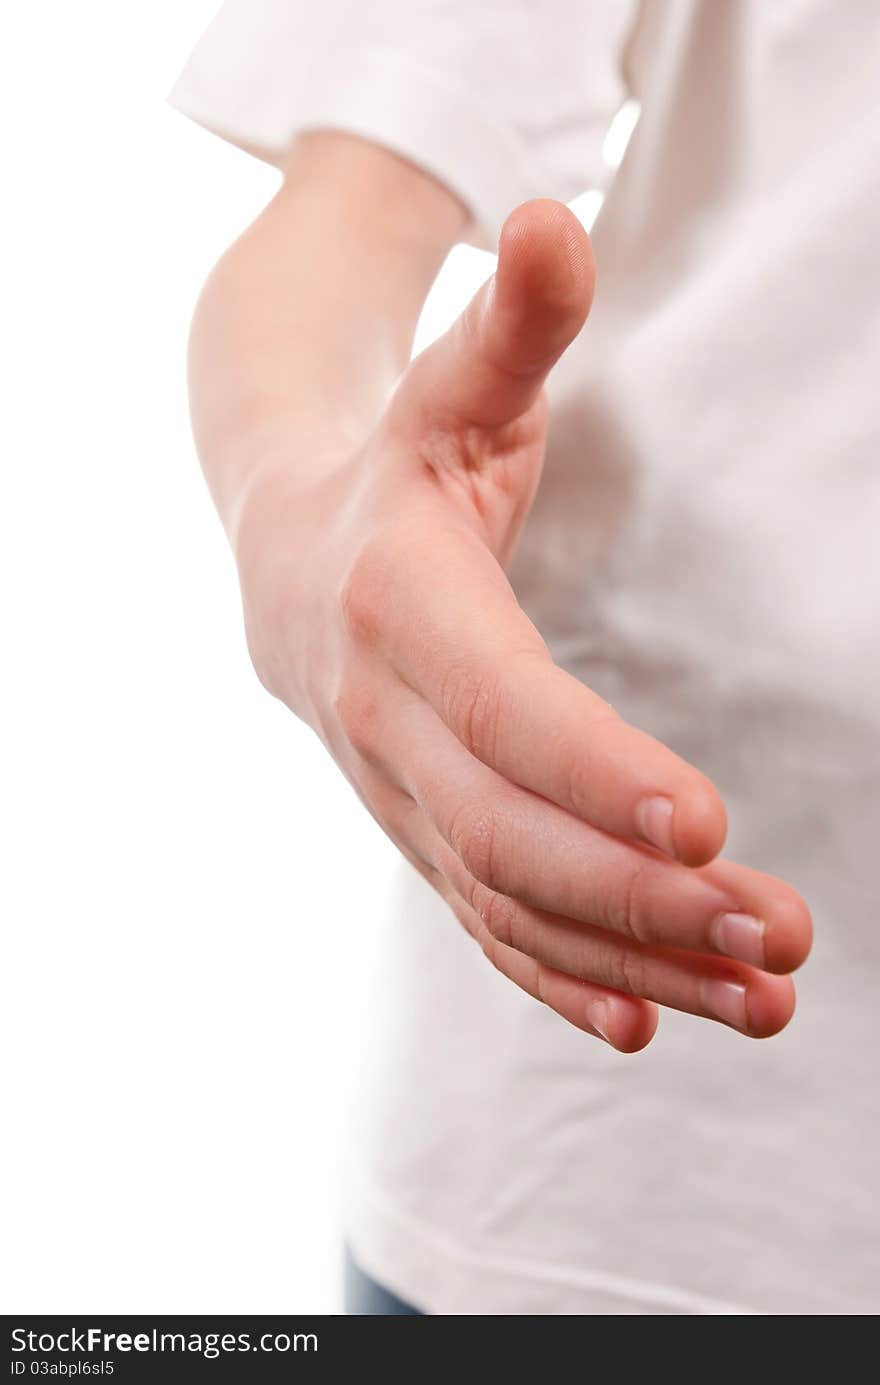 Stretched boy's hand isolated on white background